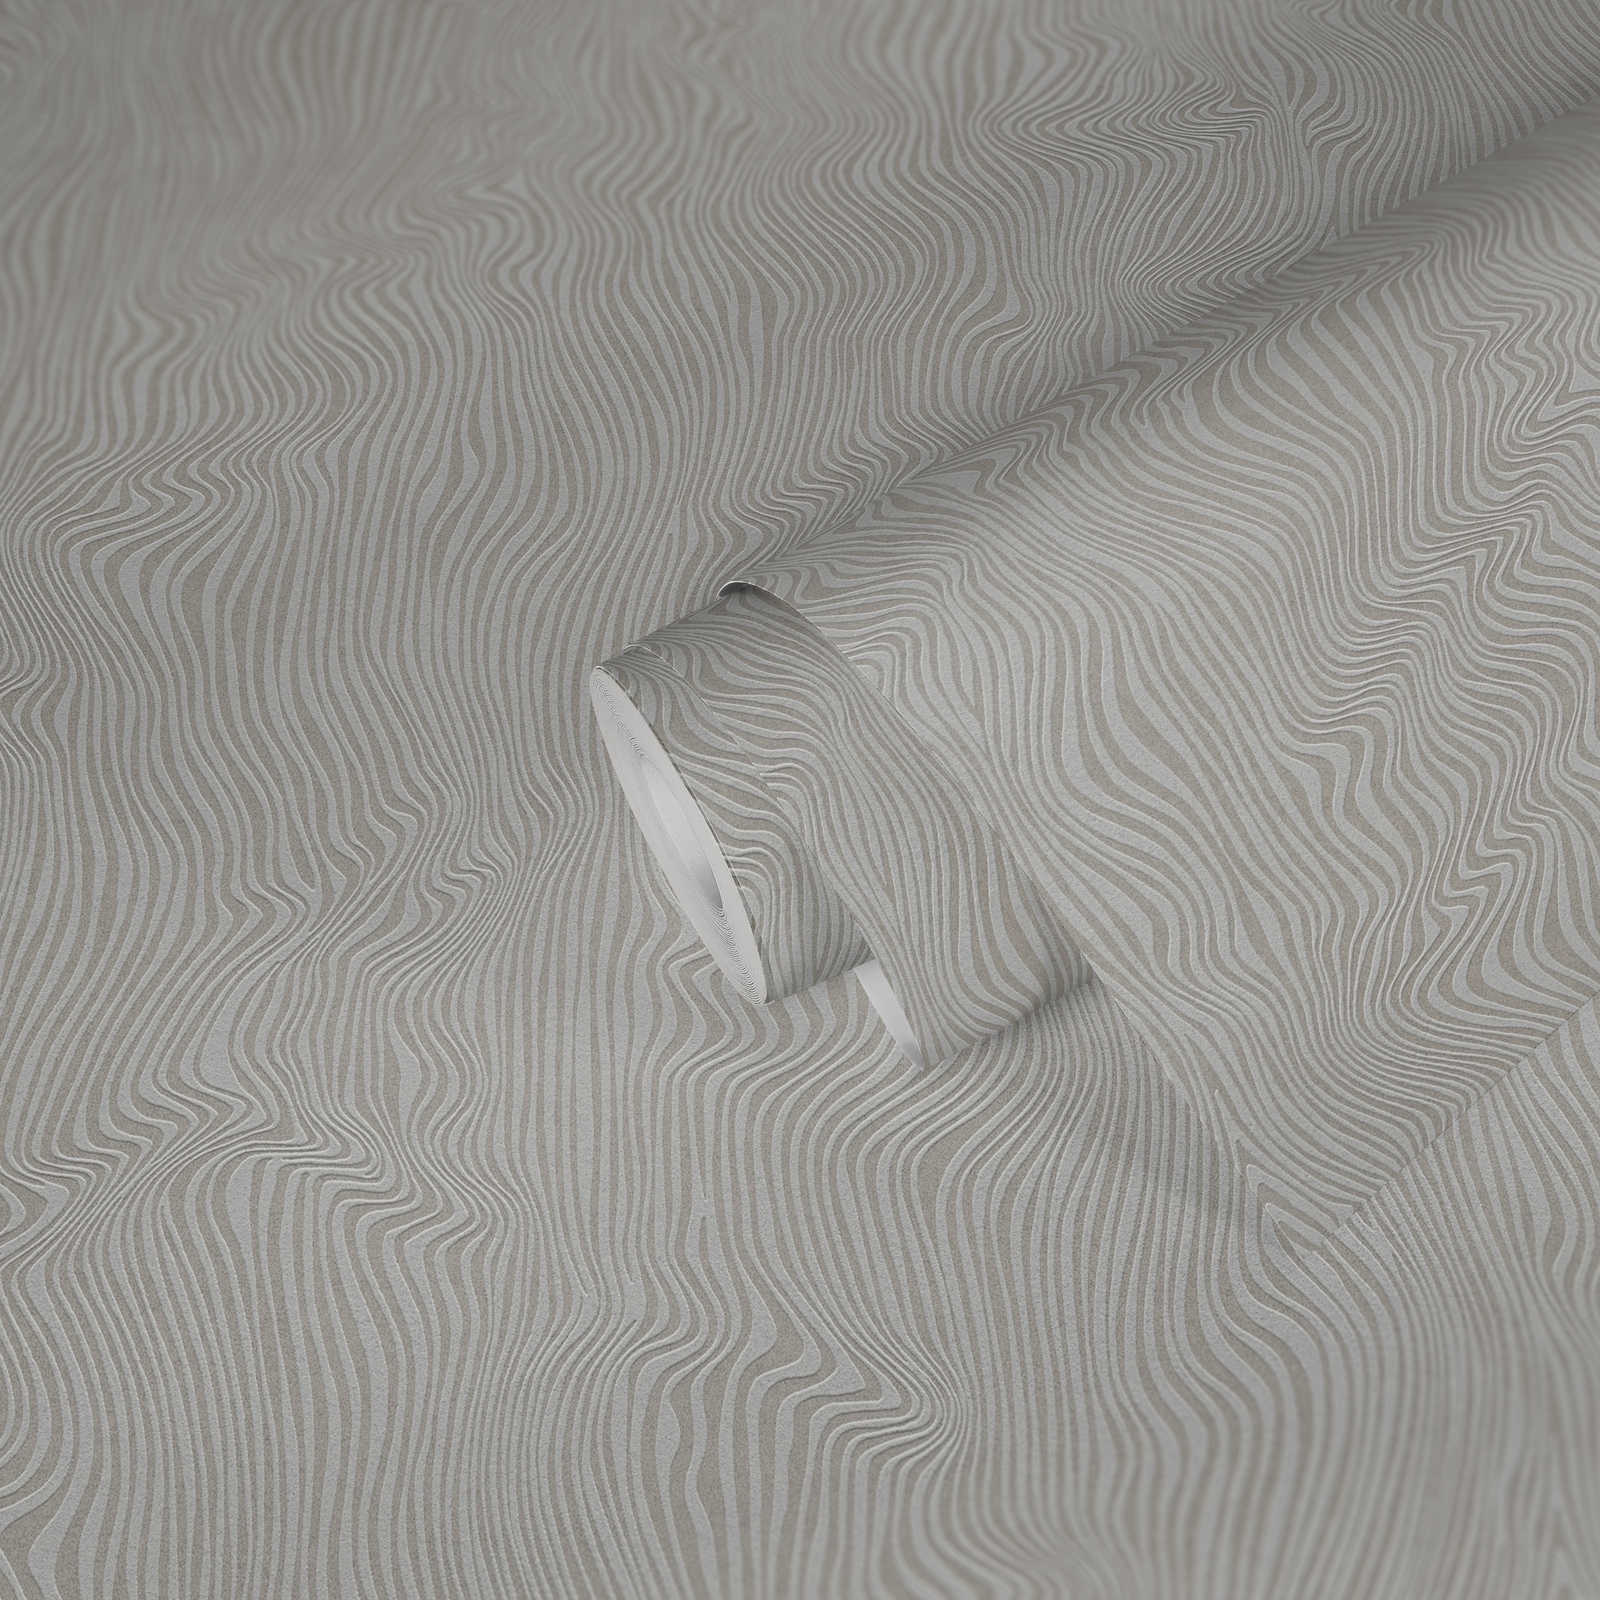             Textured wallpaper with line pattern plain - grey
        